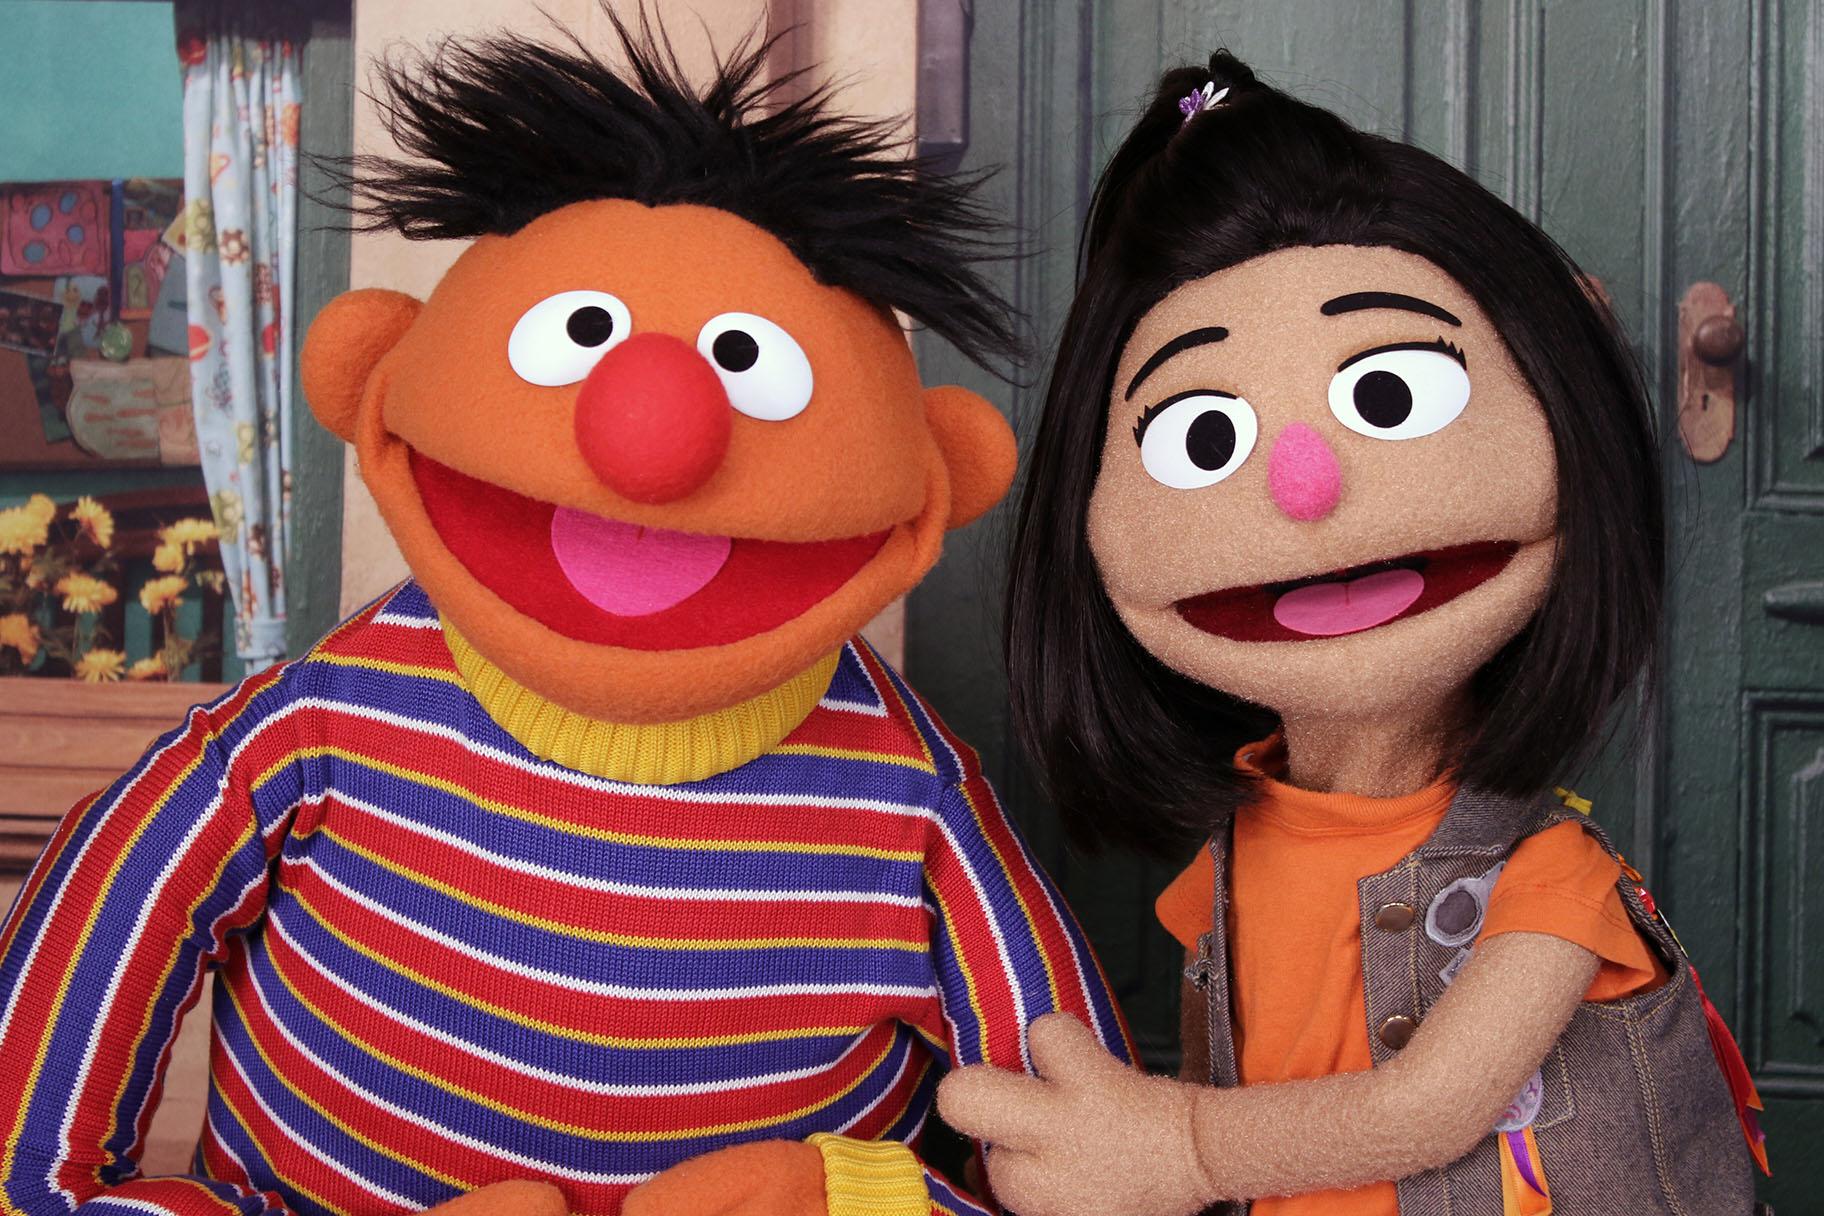 Ernie, a muppet from the popular children's series "Sesame Street," appears with new character Ji-Young, the first Asian American muppet, on the set of the long-running children's program in New York on Nov. 1, 2021. (AP Photo / Noreen Nasir, File) 